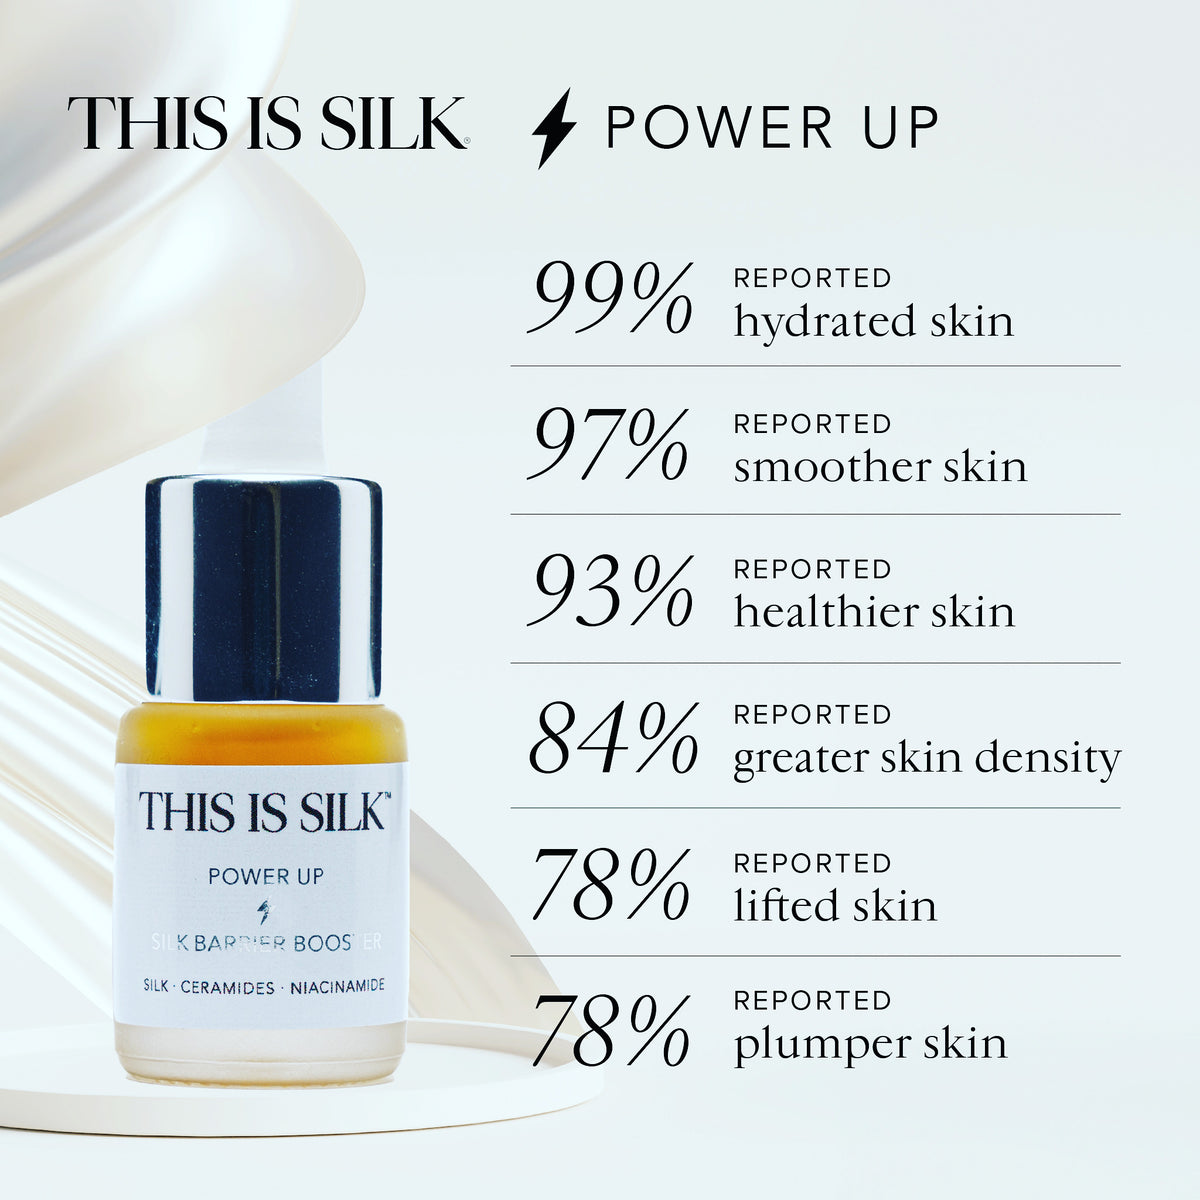 Power Up / Silk Barrier Booster / NEW IN